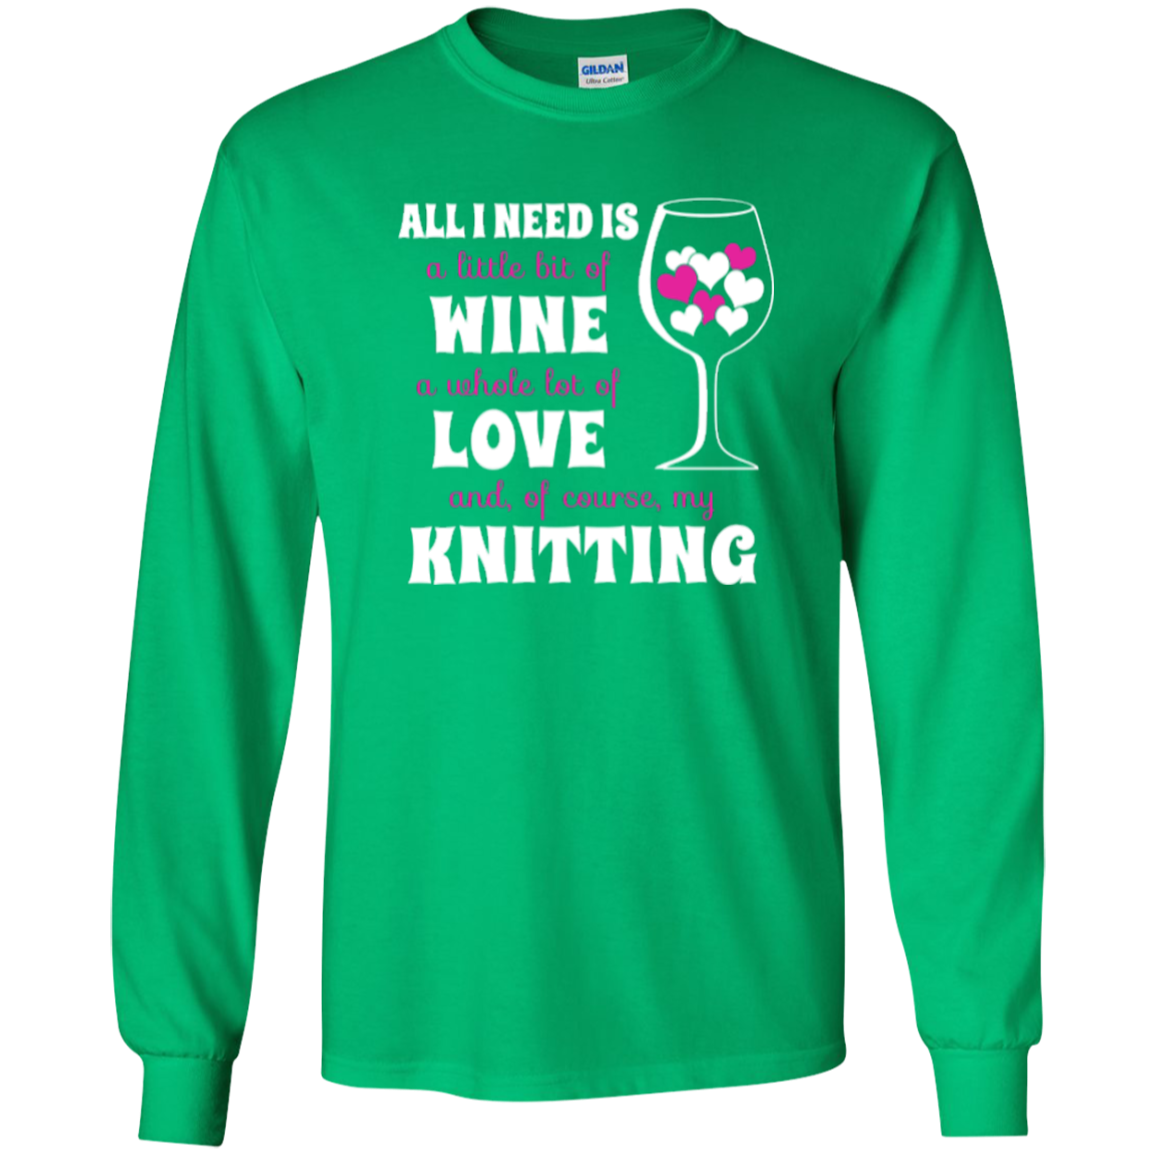 All I Need is Wine-Love-Knitting Long Sleeve Ultra Cotton Tshirt - Crafter4Life - 6